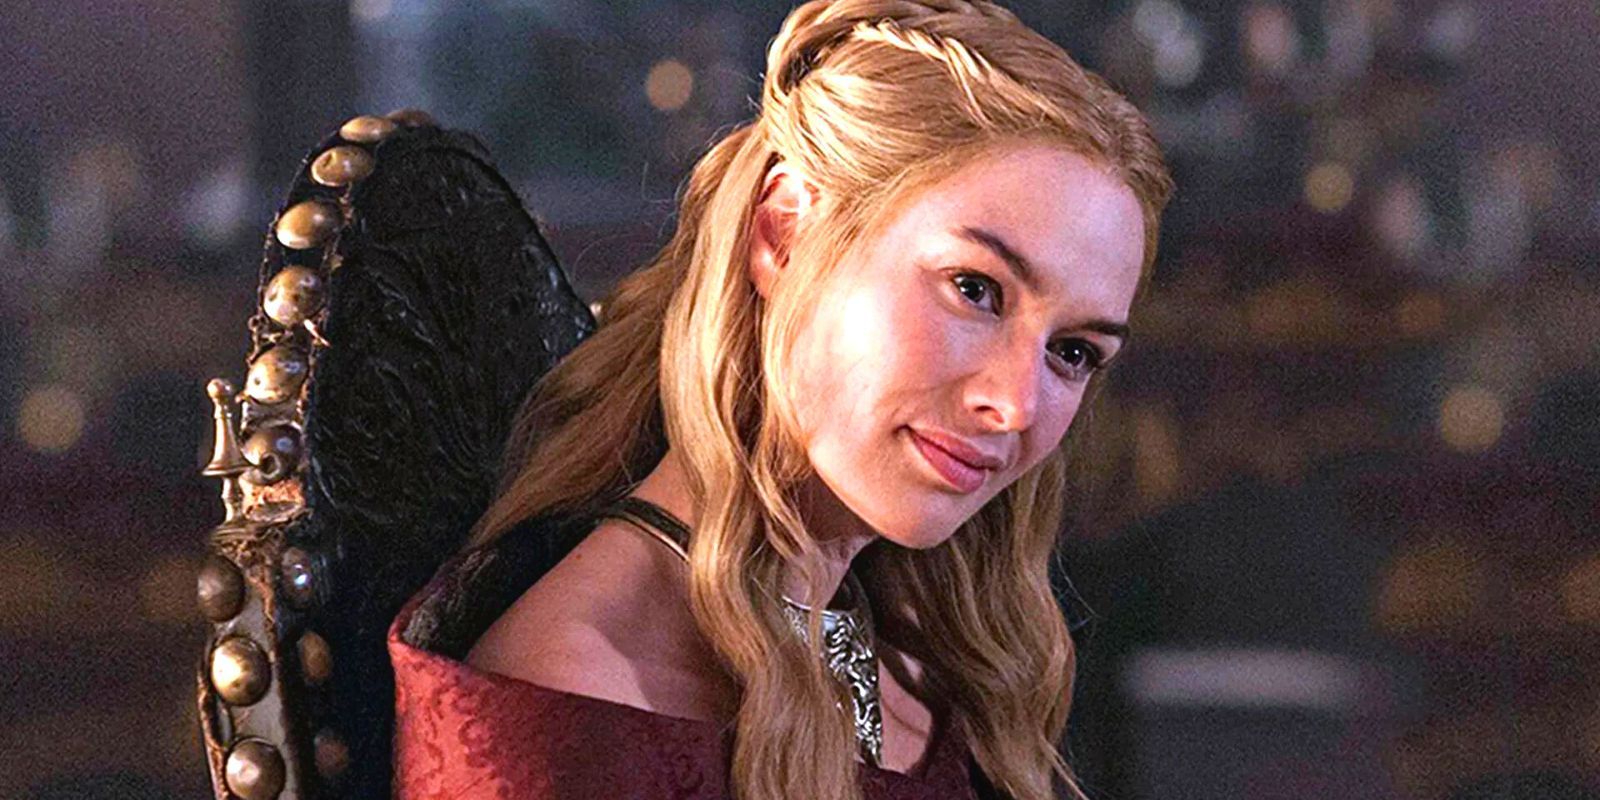 Lena Headey as Cersei Lannister, sitting in an ornate chair with her head cocked